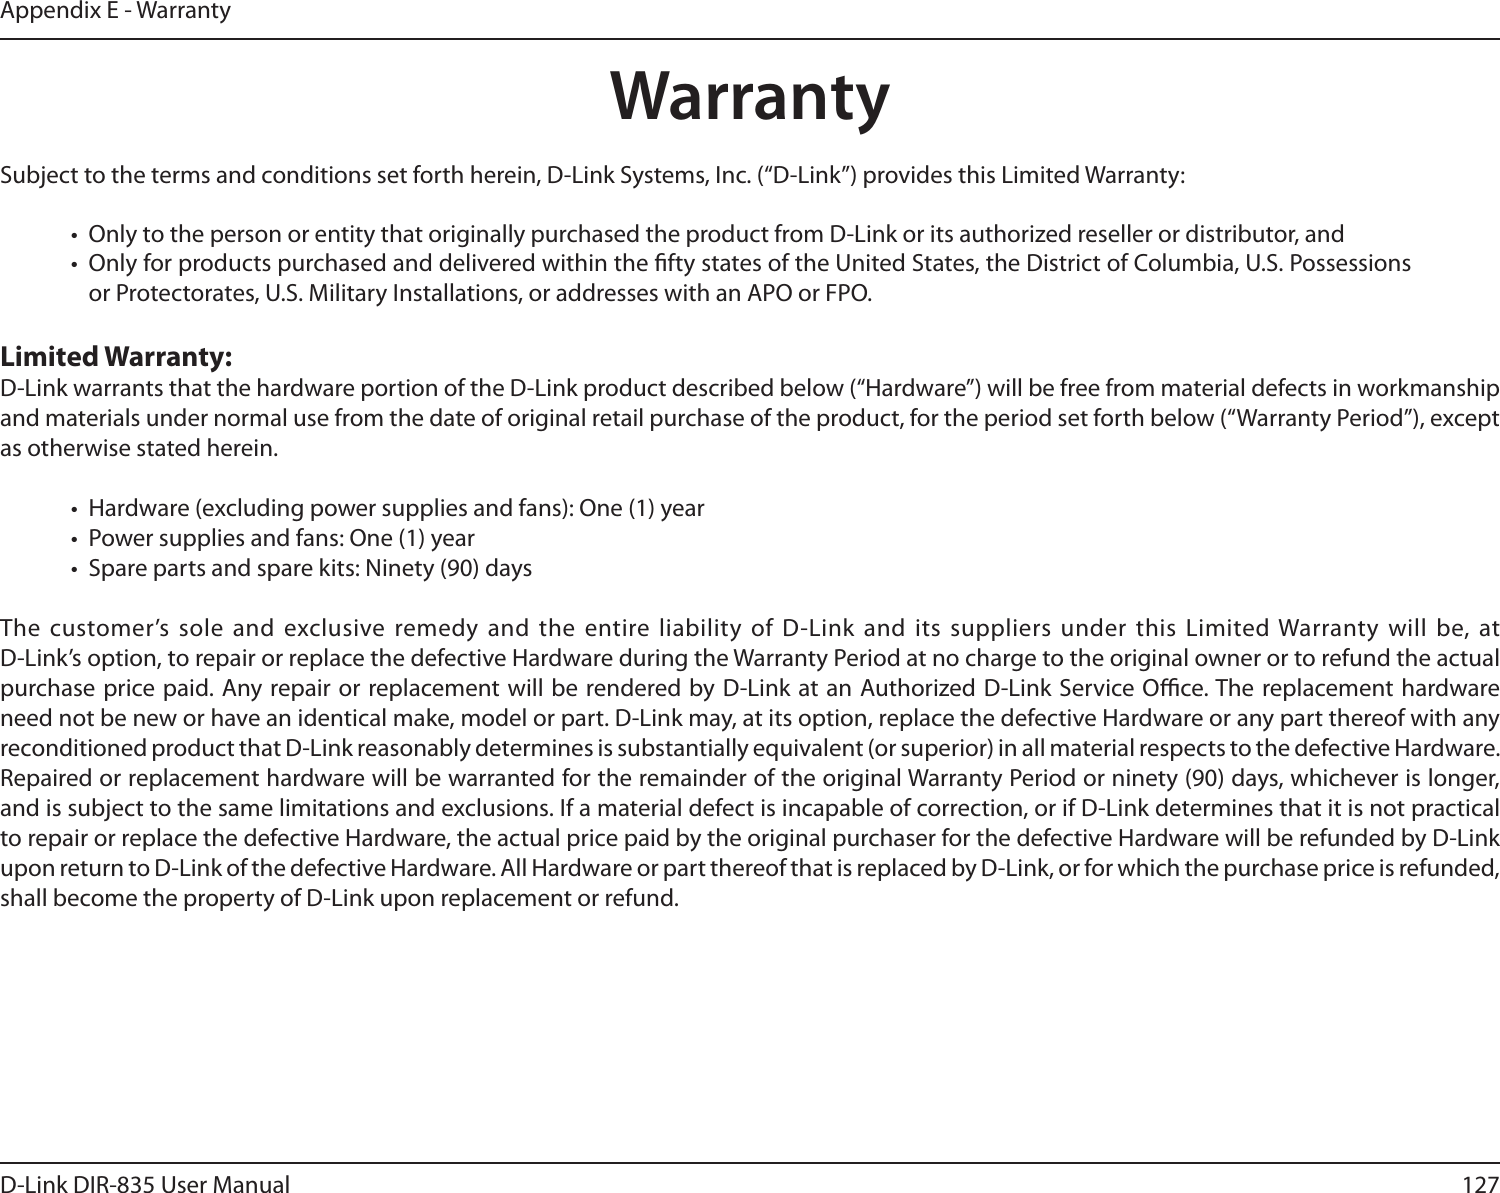 127D-Link DIR-835 User ManualAppendix E - WarrantyWarrantySubject to the terms and conditions set forth herein, D-Link Systems, Inc. (“D-Link”) provides this Limited Warranty:•  Only to the person or entity that originally purchased the product from D-Link or its authorized reseller or distributor, and•  Only for products purchased and delivered within the fty states of the United States, the District of Columbia, U.S. Possessions or Protectorates, U.S. Military Installations, or addresses with an APO or FPO.Limited Warranty:D-Link warrants that the hardware portion of the D-Link product described below (“Hardware”) will be free from material defects in workmanship and materials under normal use from the date of original retail purchase of the product, for the period set forth below (“Warranty Period”), except as otherwise stated herein.•  Hardware (excluding power supplies and fans): One (1) year•  Power supplies and fans: One (1) year•  Spare parts and spare kits: Ninety (90) daysThe customer’s sole and  exclusive remedy and  the entire liability  of D-Link and  its suppliers under  this Limited Warranty  will be, at  D-Link’s option, to repair or replace the defective Hardware during the Warranty Period at no charge to the original owner or to refund the actual purchase price paid. Any repair or replacement will be rendered by D-Link at an Authorized D-Link Service Oce. The replacement hardware need not be new or have an identical make, model or part. D-Link may, at its option, replace the defective Hardware or any part thereof with any reconditioned product that D-Link reasonably determines is substantially equivalent (or superior) in all material respects to the defective Hardware. Repaired or replacement hardware will be warranted for the remainder of the original Warranty Period or ninety (90) days, whichever is longer, and is subject to the same limitations and exclusions. If a material defect is incapable of correction, or if D-Link determines that it is not practical to repair or replace the defective Hardware, the actual price paid by the original purchaser for the defective Hardware will be refunded by D-Link upon return to D-Link of the defective Hardware. All Hardware or part thereof that is replaced by D-Link, or for which the purchase price is refunded, shall become the property of D-Link upon replacement or refund.